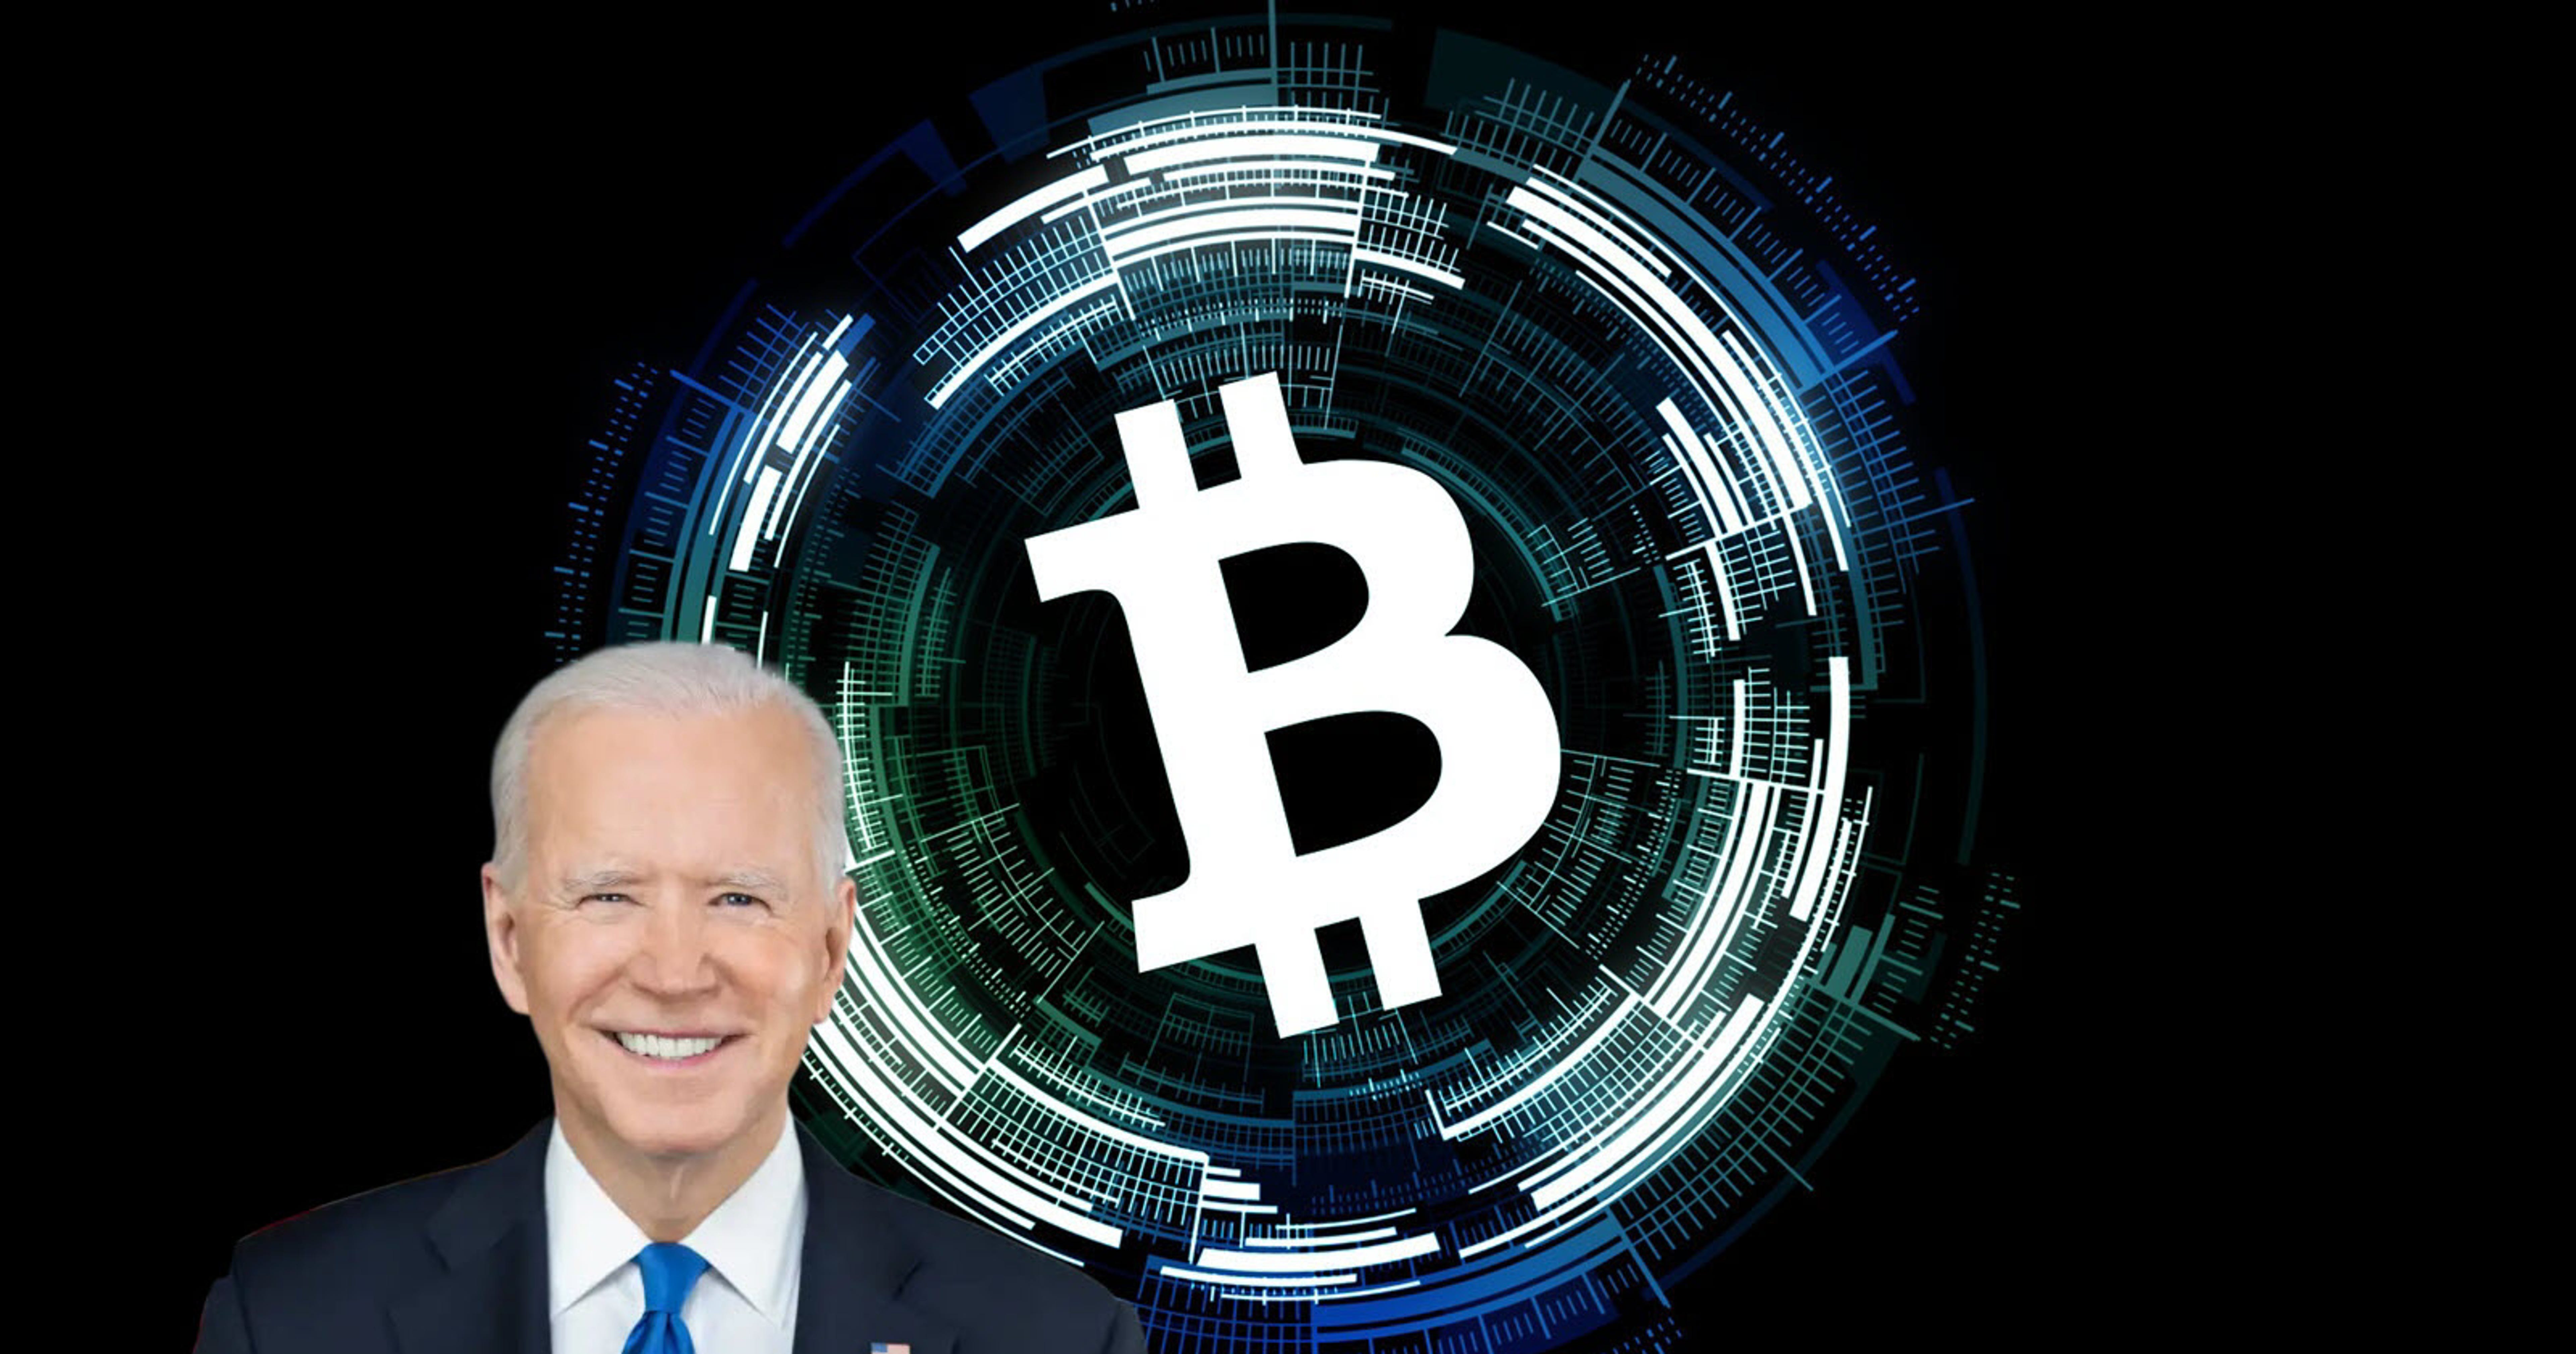 Biden Calls For Clear Regulation Of Crypto Following G20 Summit, FTX/Alameda Collapse